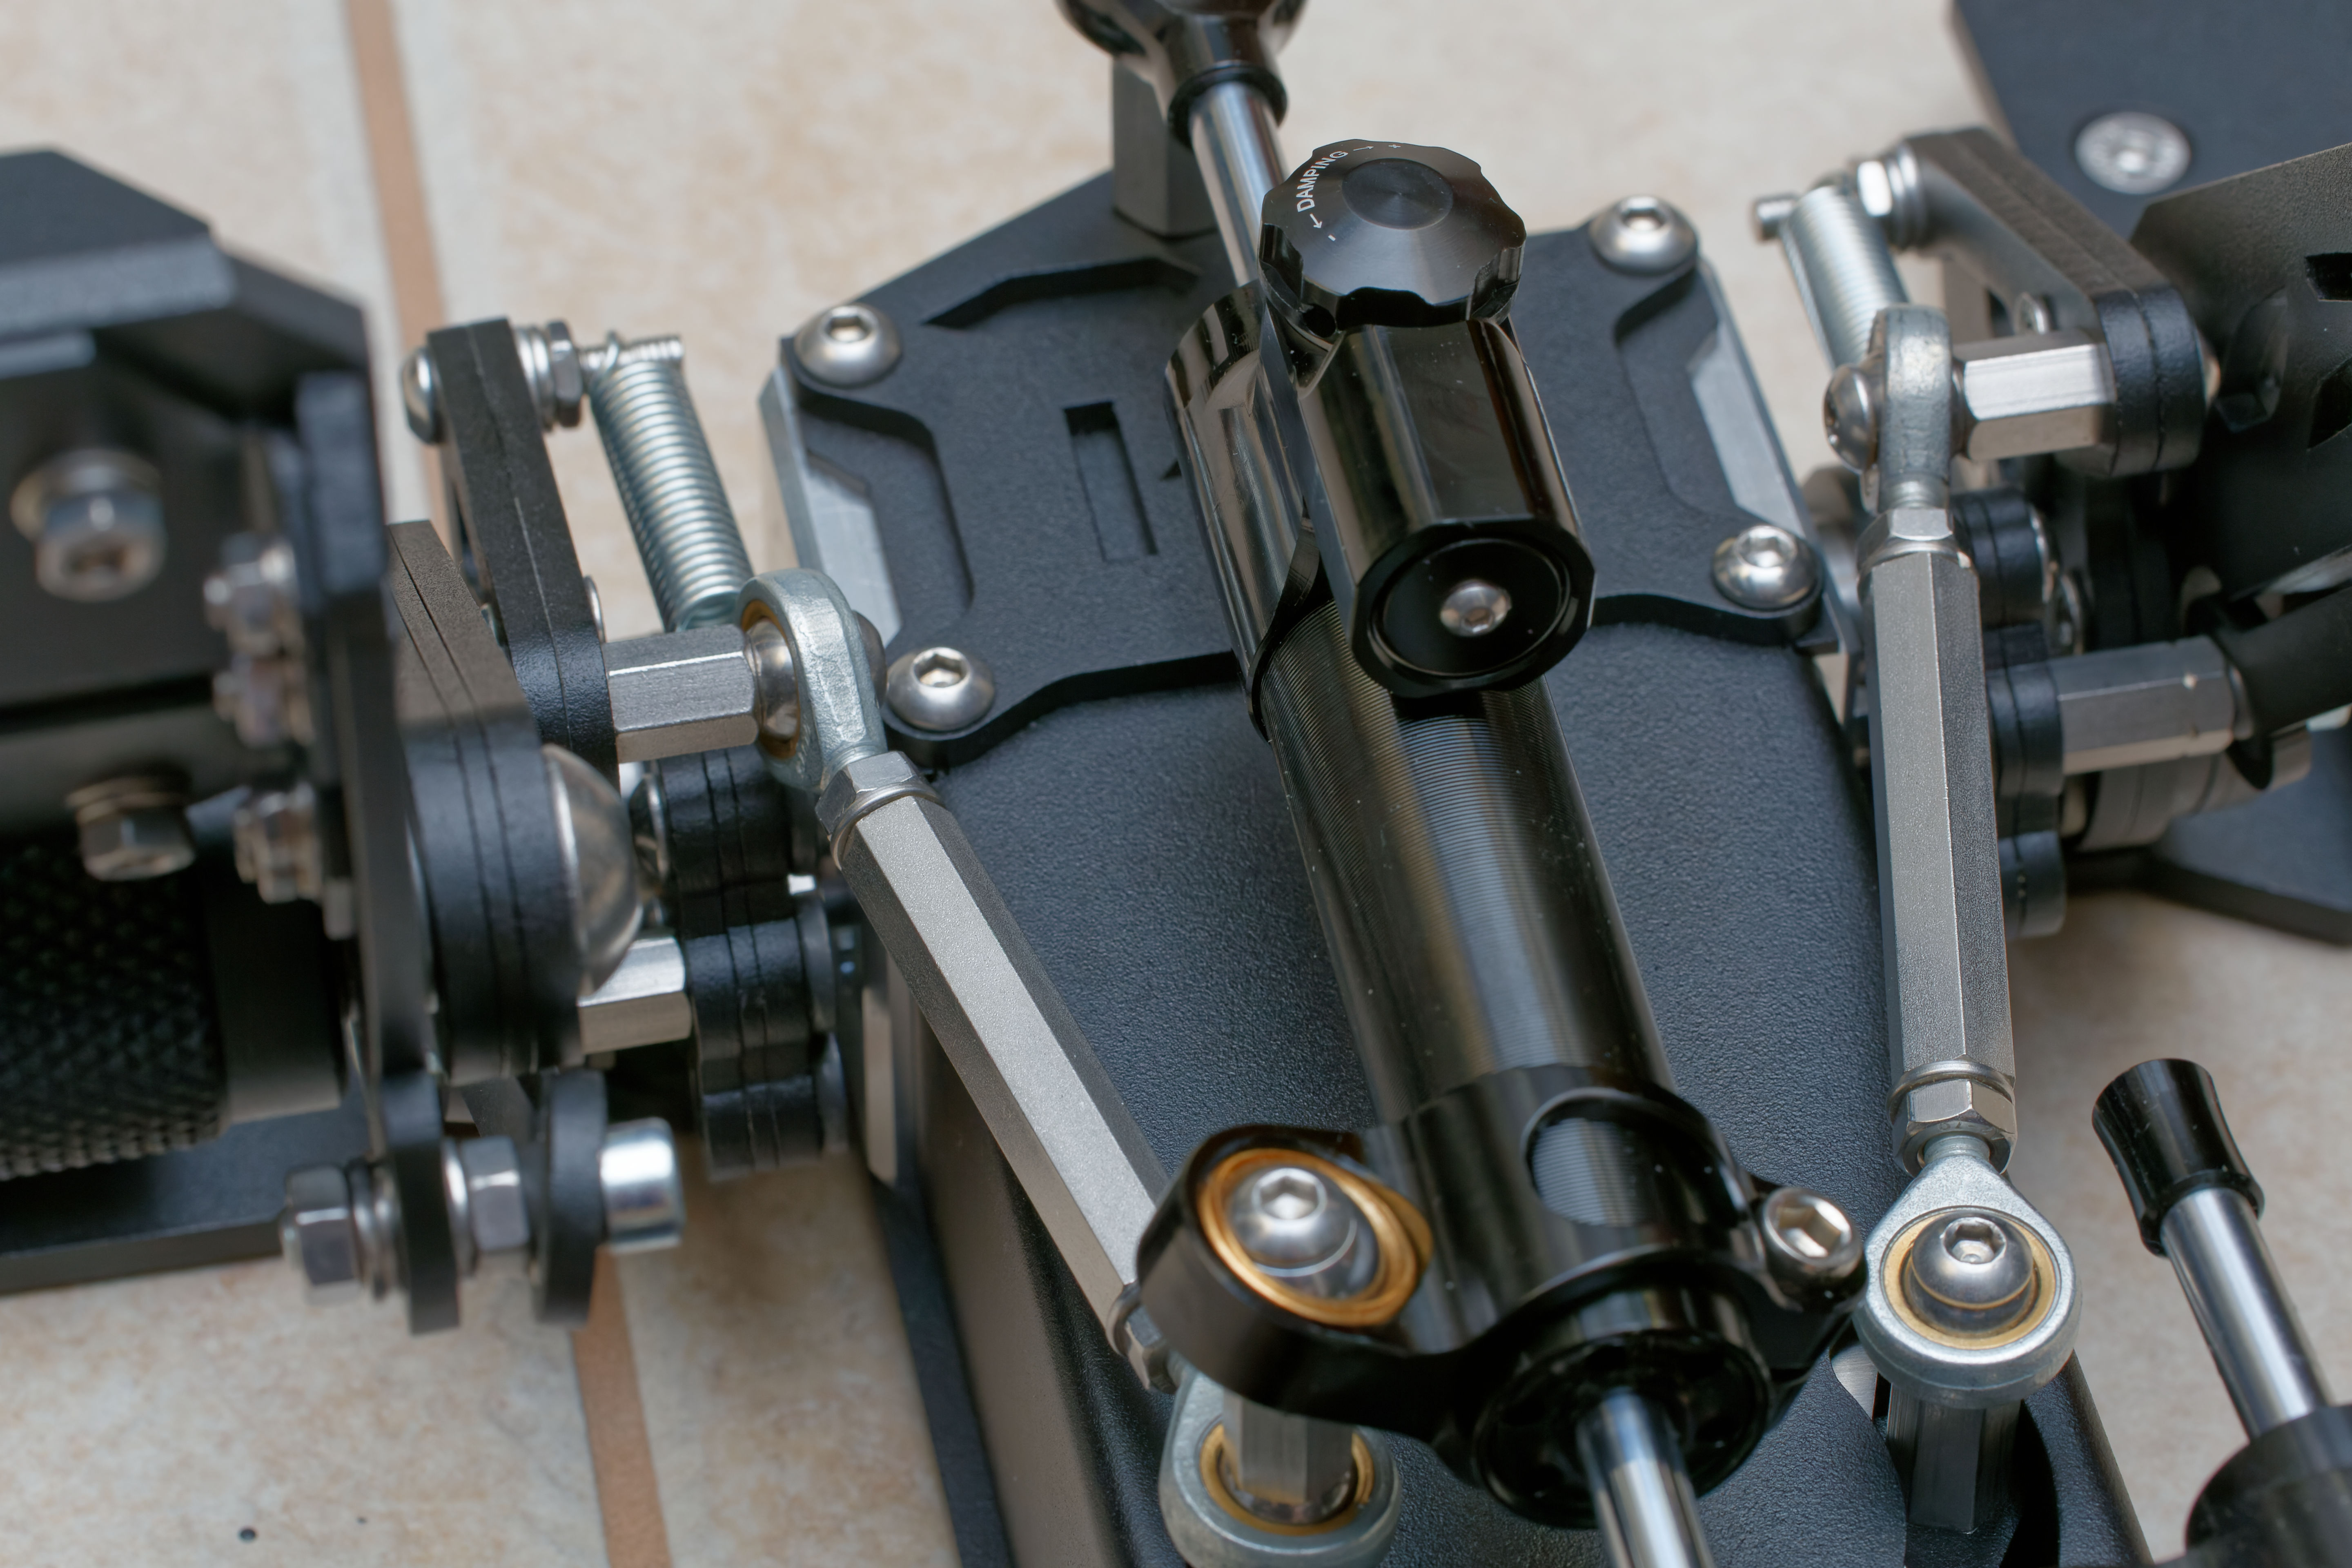 Slaw Device is back: RH Rotor Pedals rule the skies—for $475